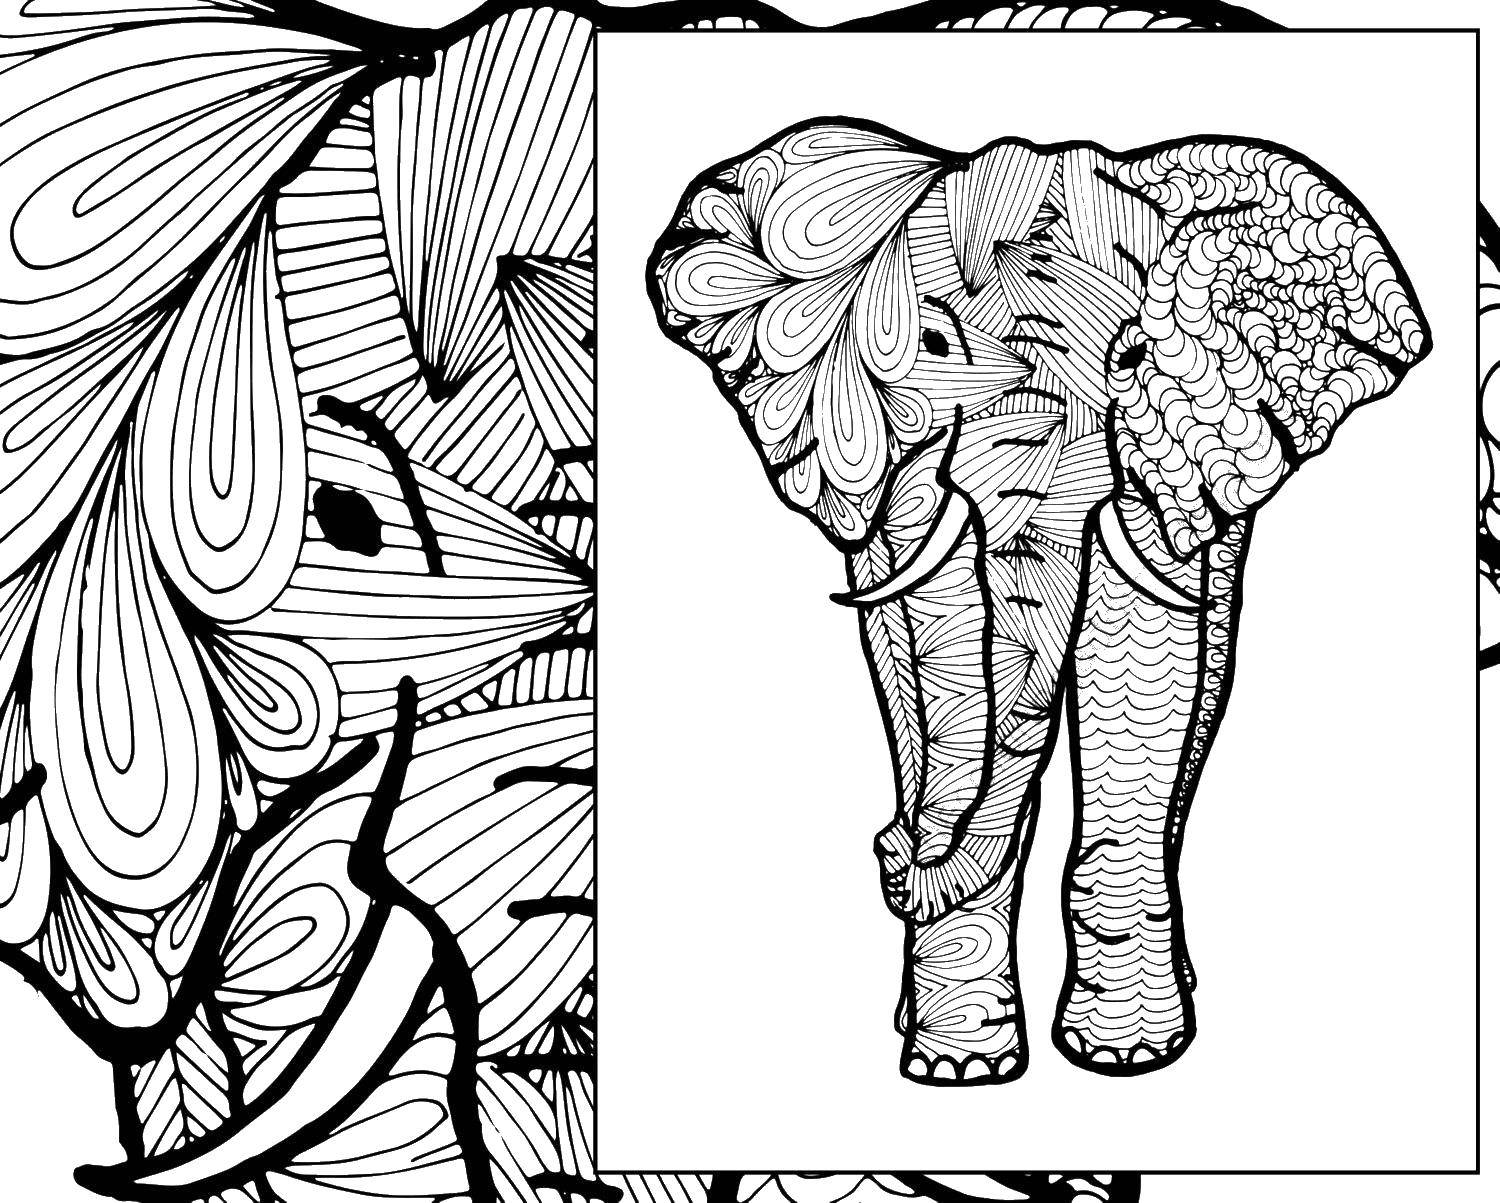 Coloring Coloring antistress, elephant. Category Bathroom with shower. Tags:  antisress, patterns, shapes, elephant.